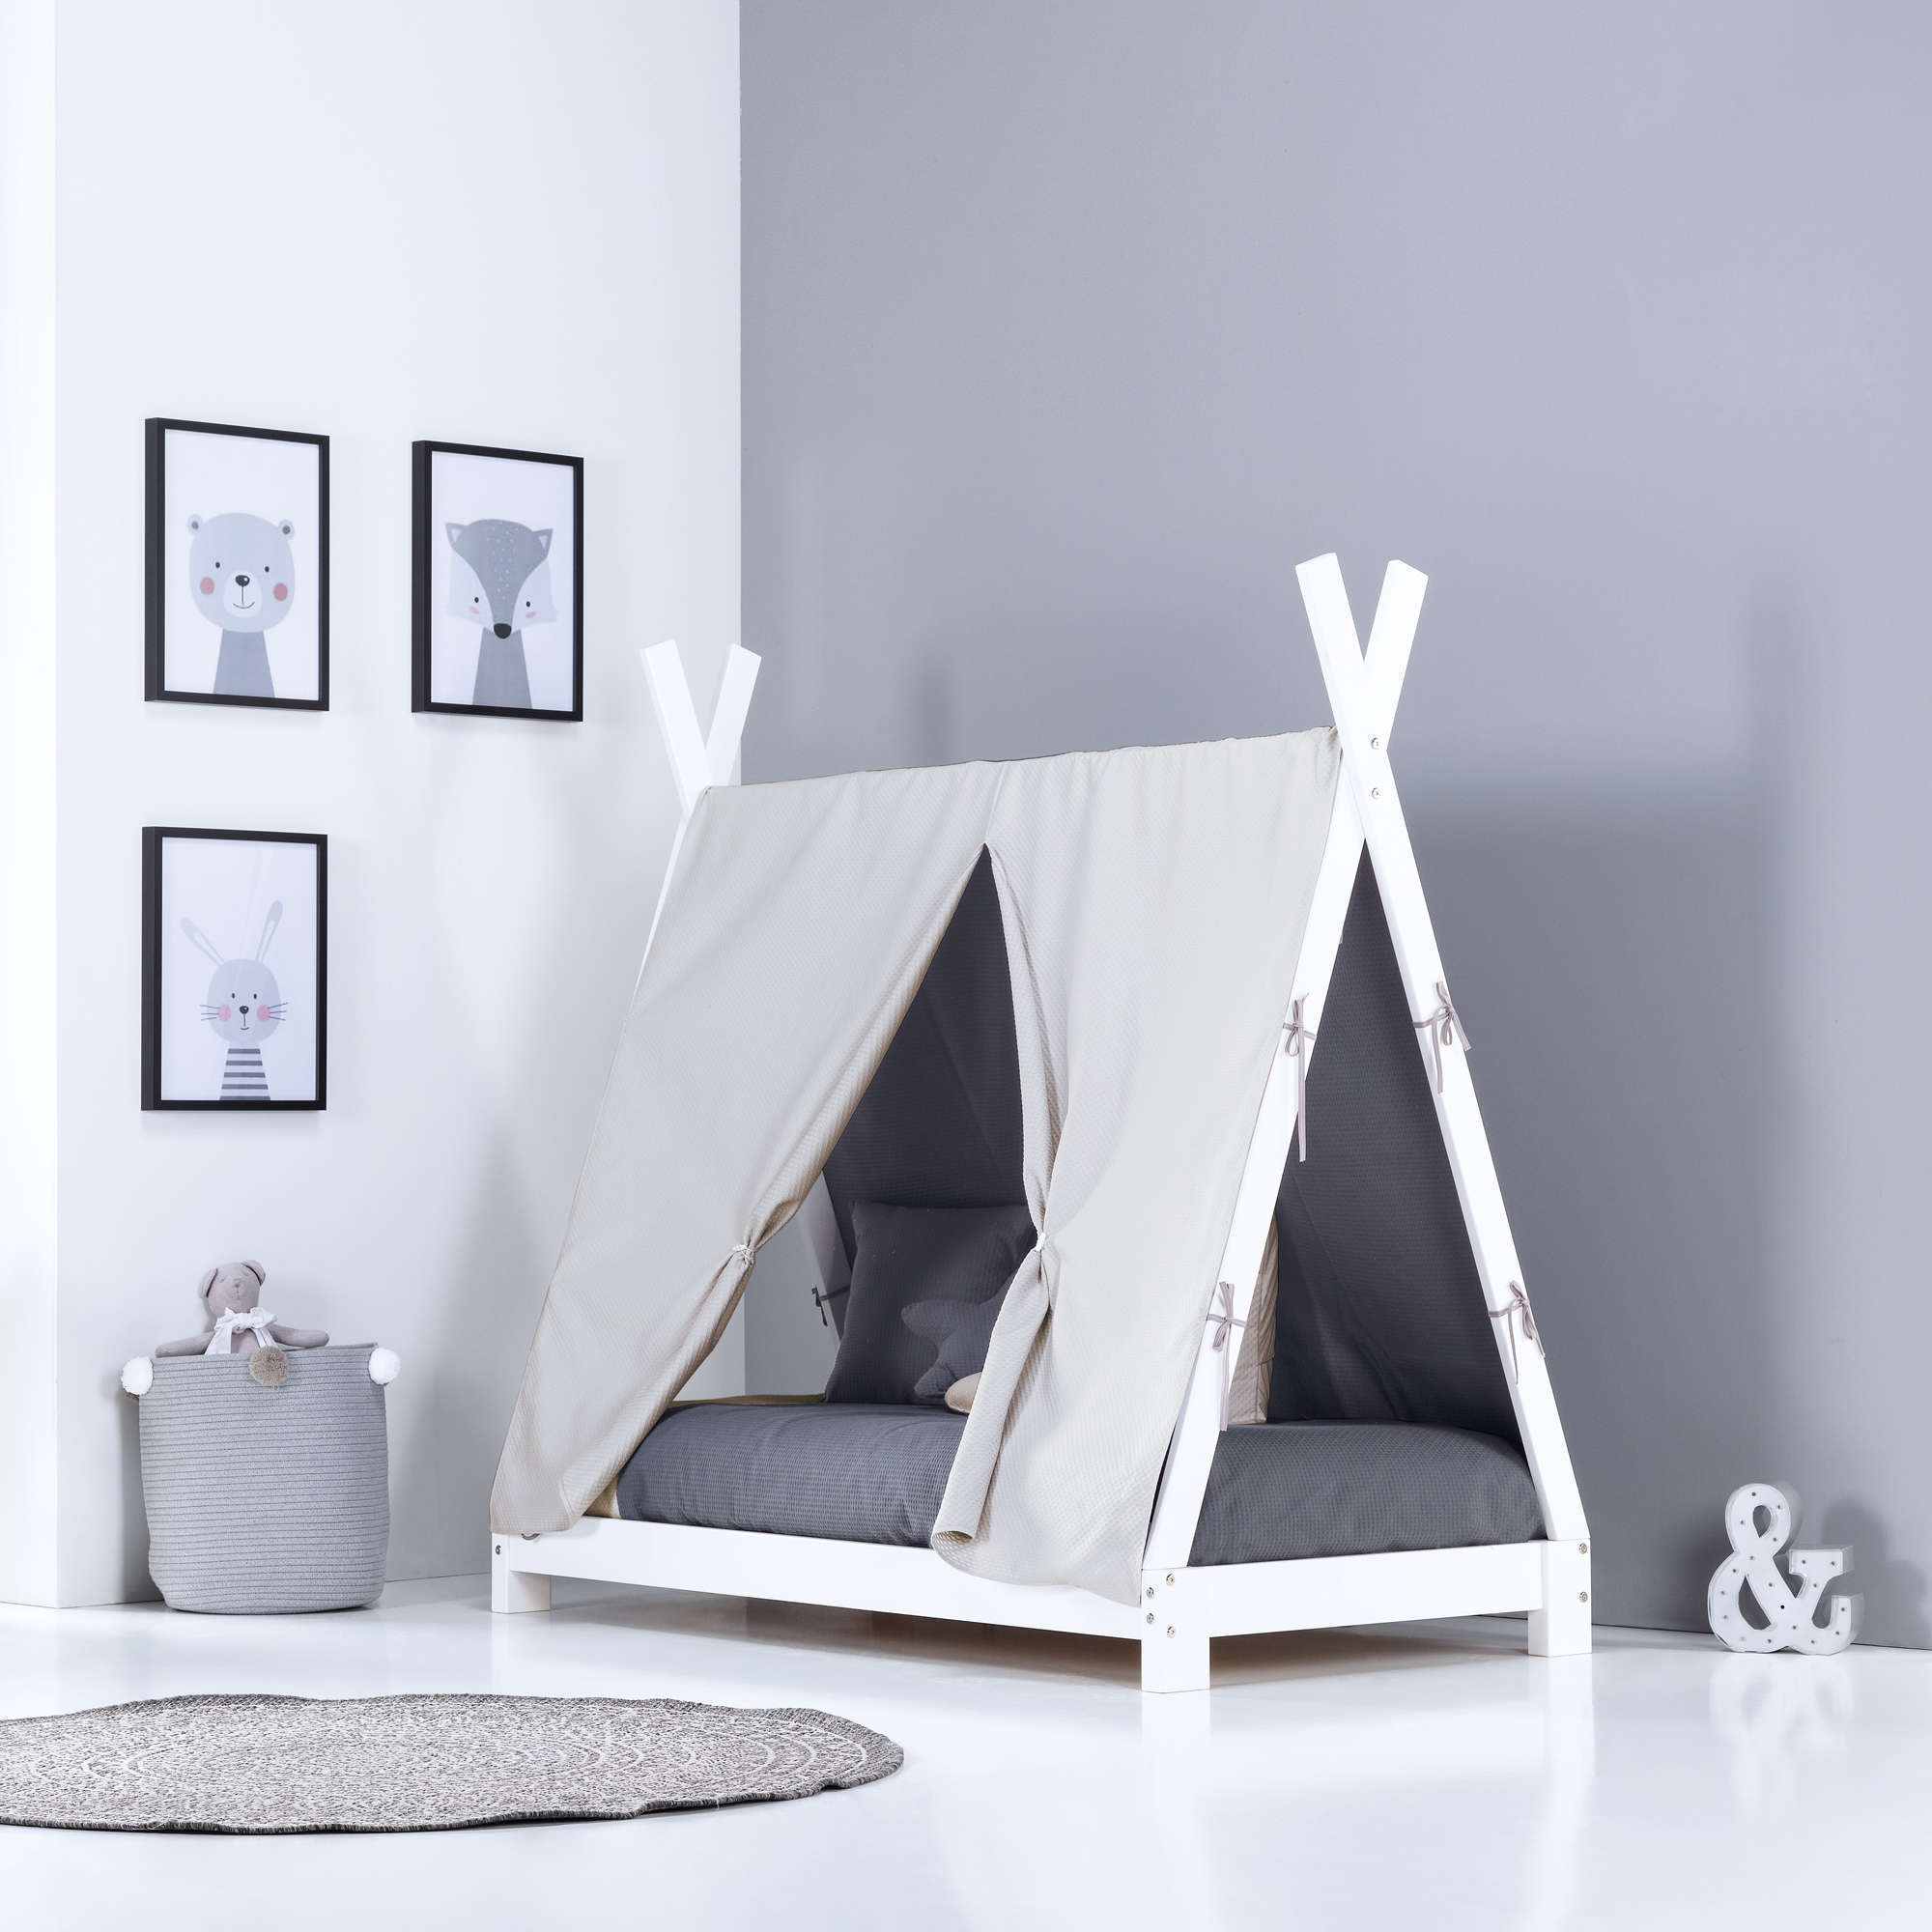 Cot-bed for babies in the shape of a hut, Montessori philosophy